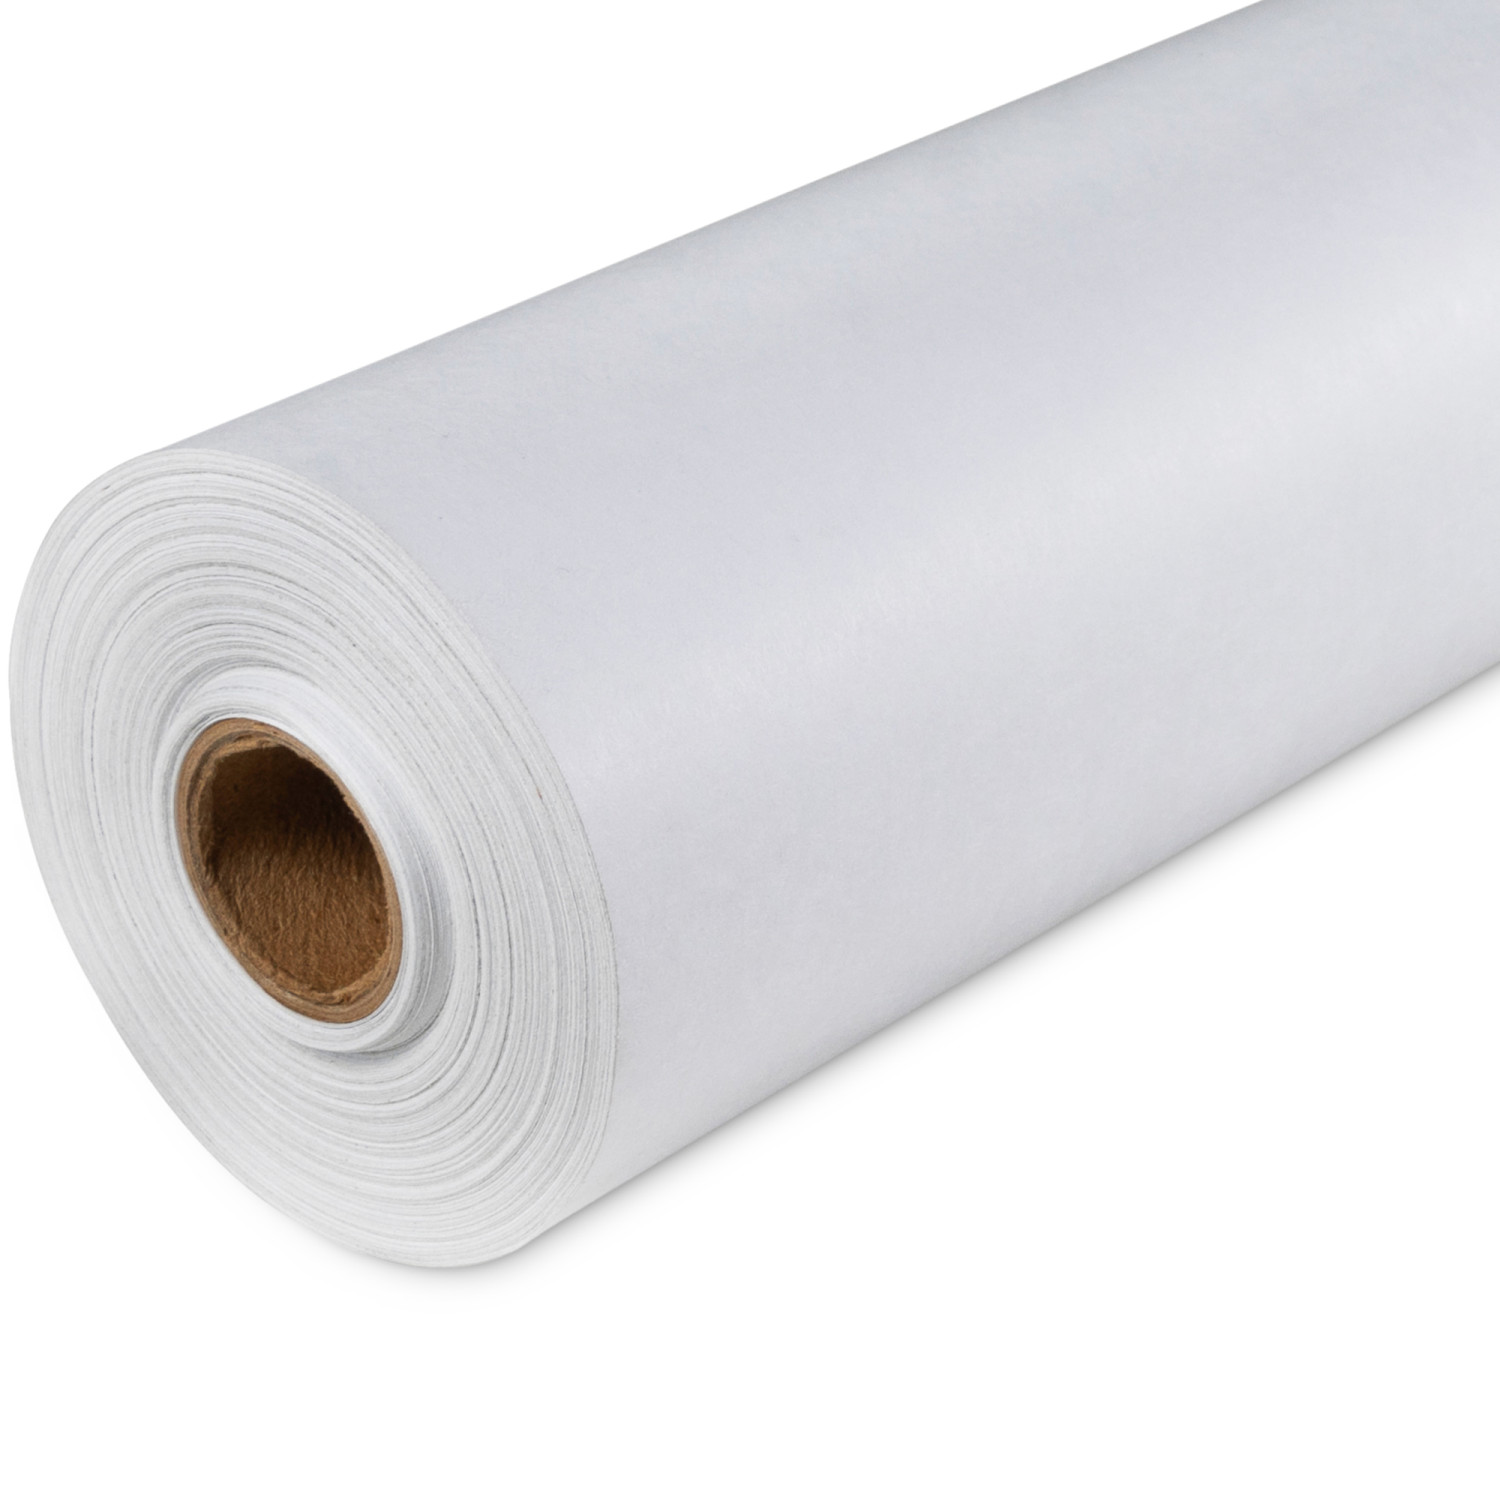 36 x 180 White Butcher Paper Roll for Wrapping Meat and Fish buy in stock  in U.S. in IDL Packaging